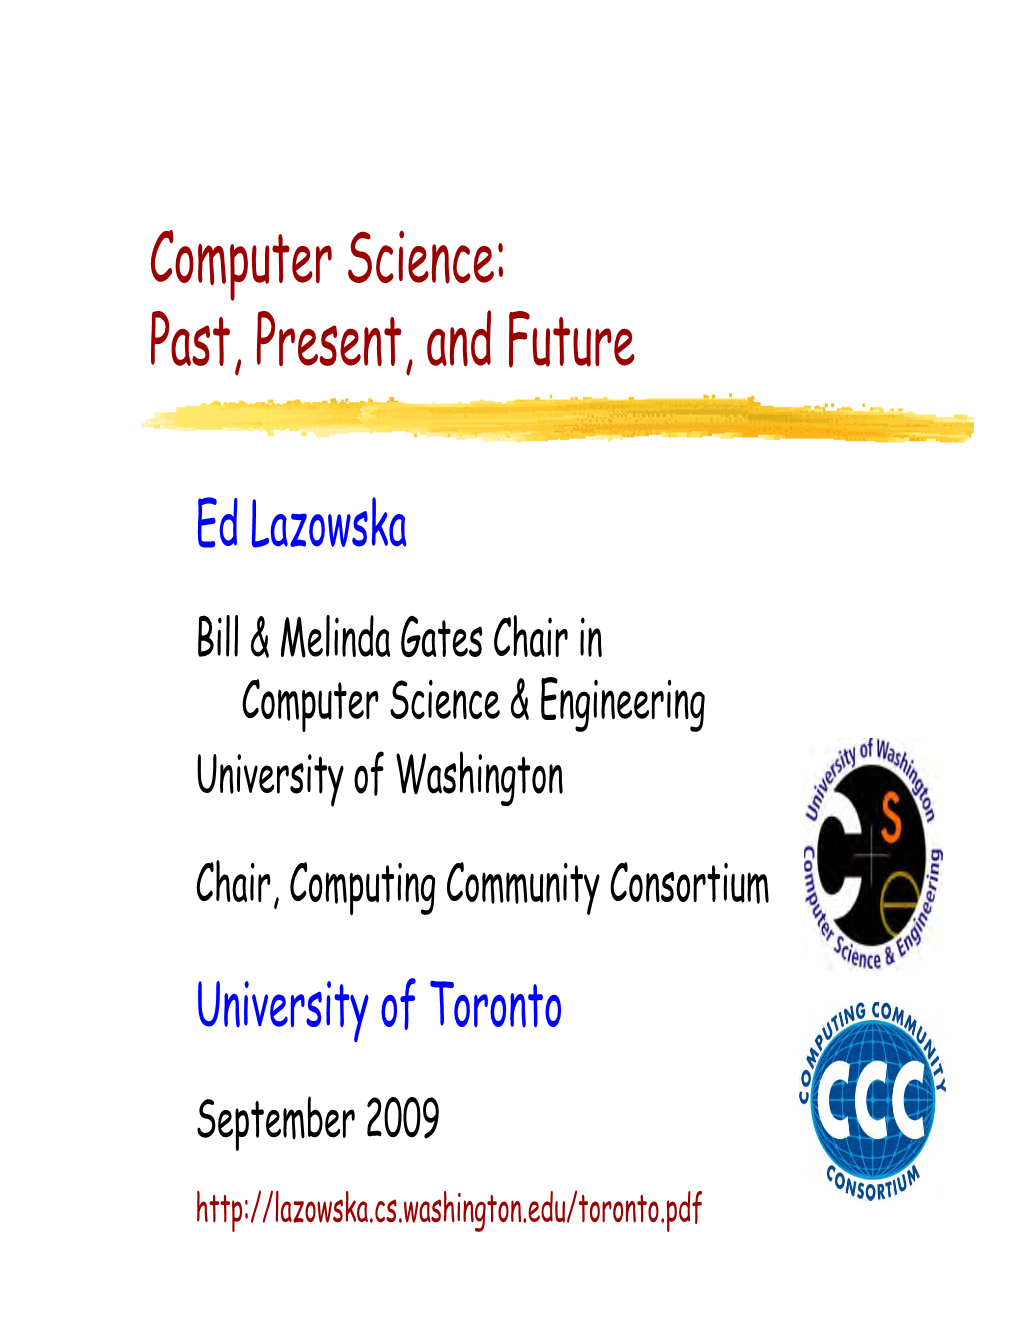 Computer Science: Past, Present, and Future